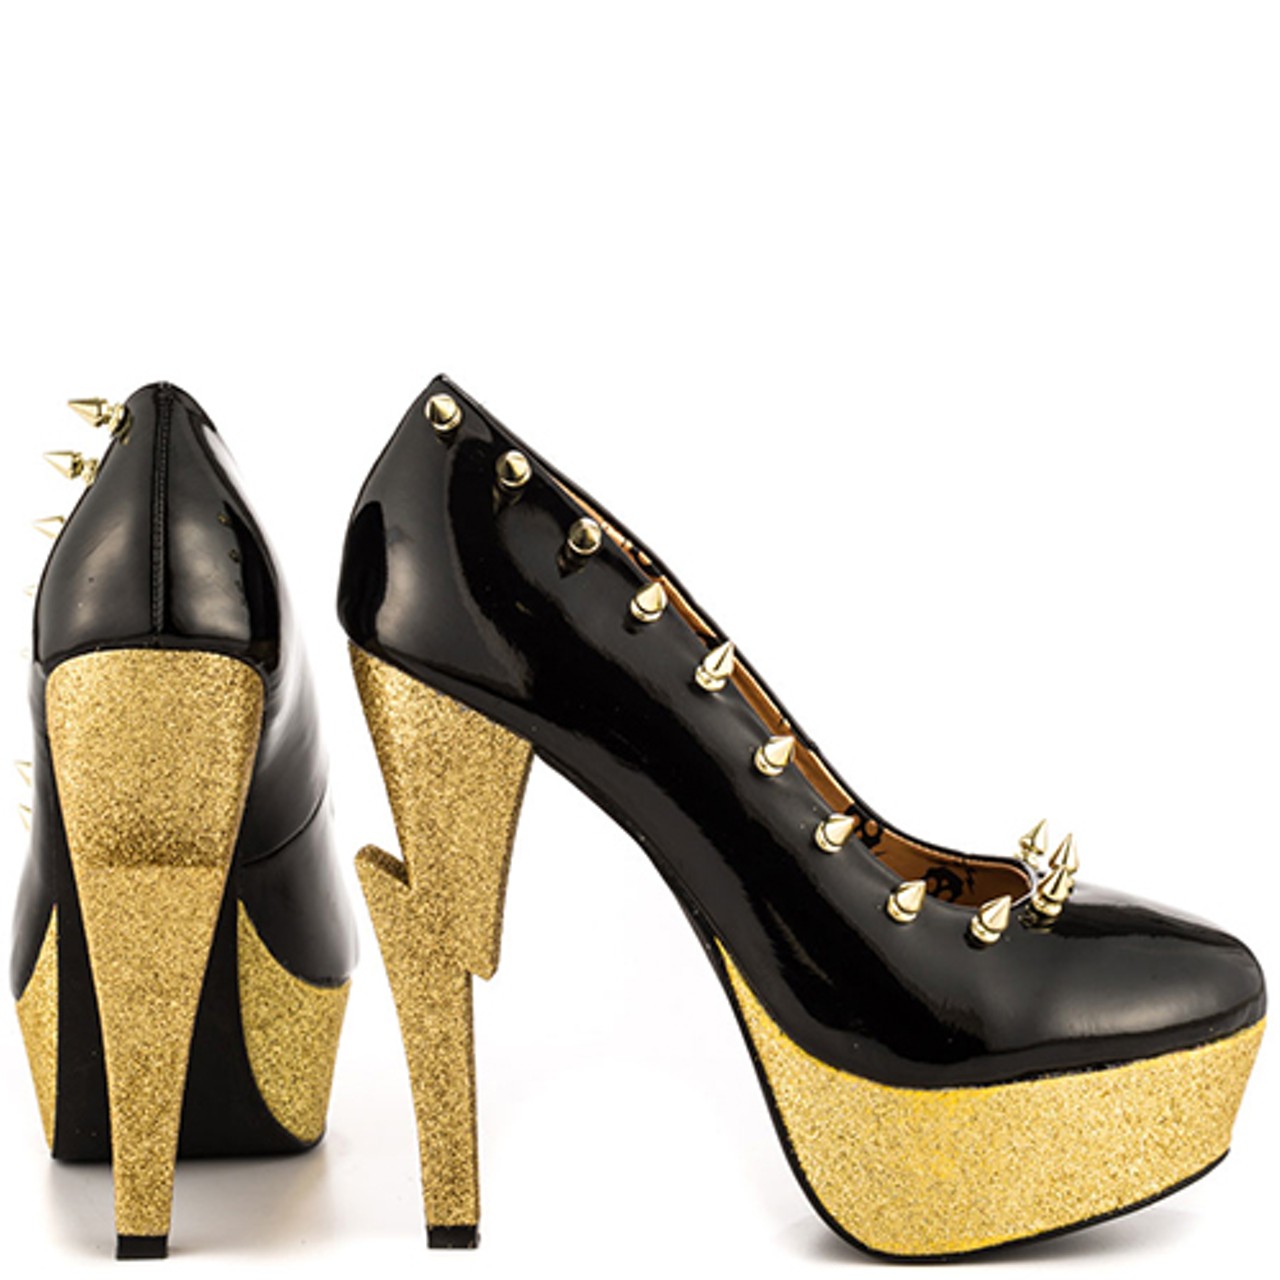 GOLD BOLT HEELS ..........
Lightening bolt shaped heel in gold glitter. Shiny black upper with gold spikes along outer side and across the front toe. 5 1/2 inch heel and 1 1/2 inch platform. You wanna inflict some pain? Step on his back with these puppies!